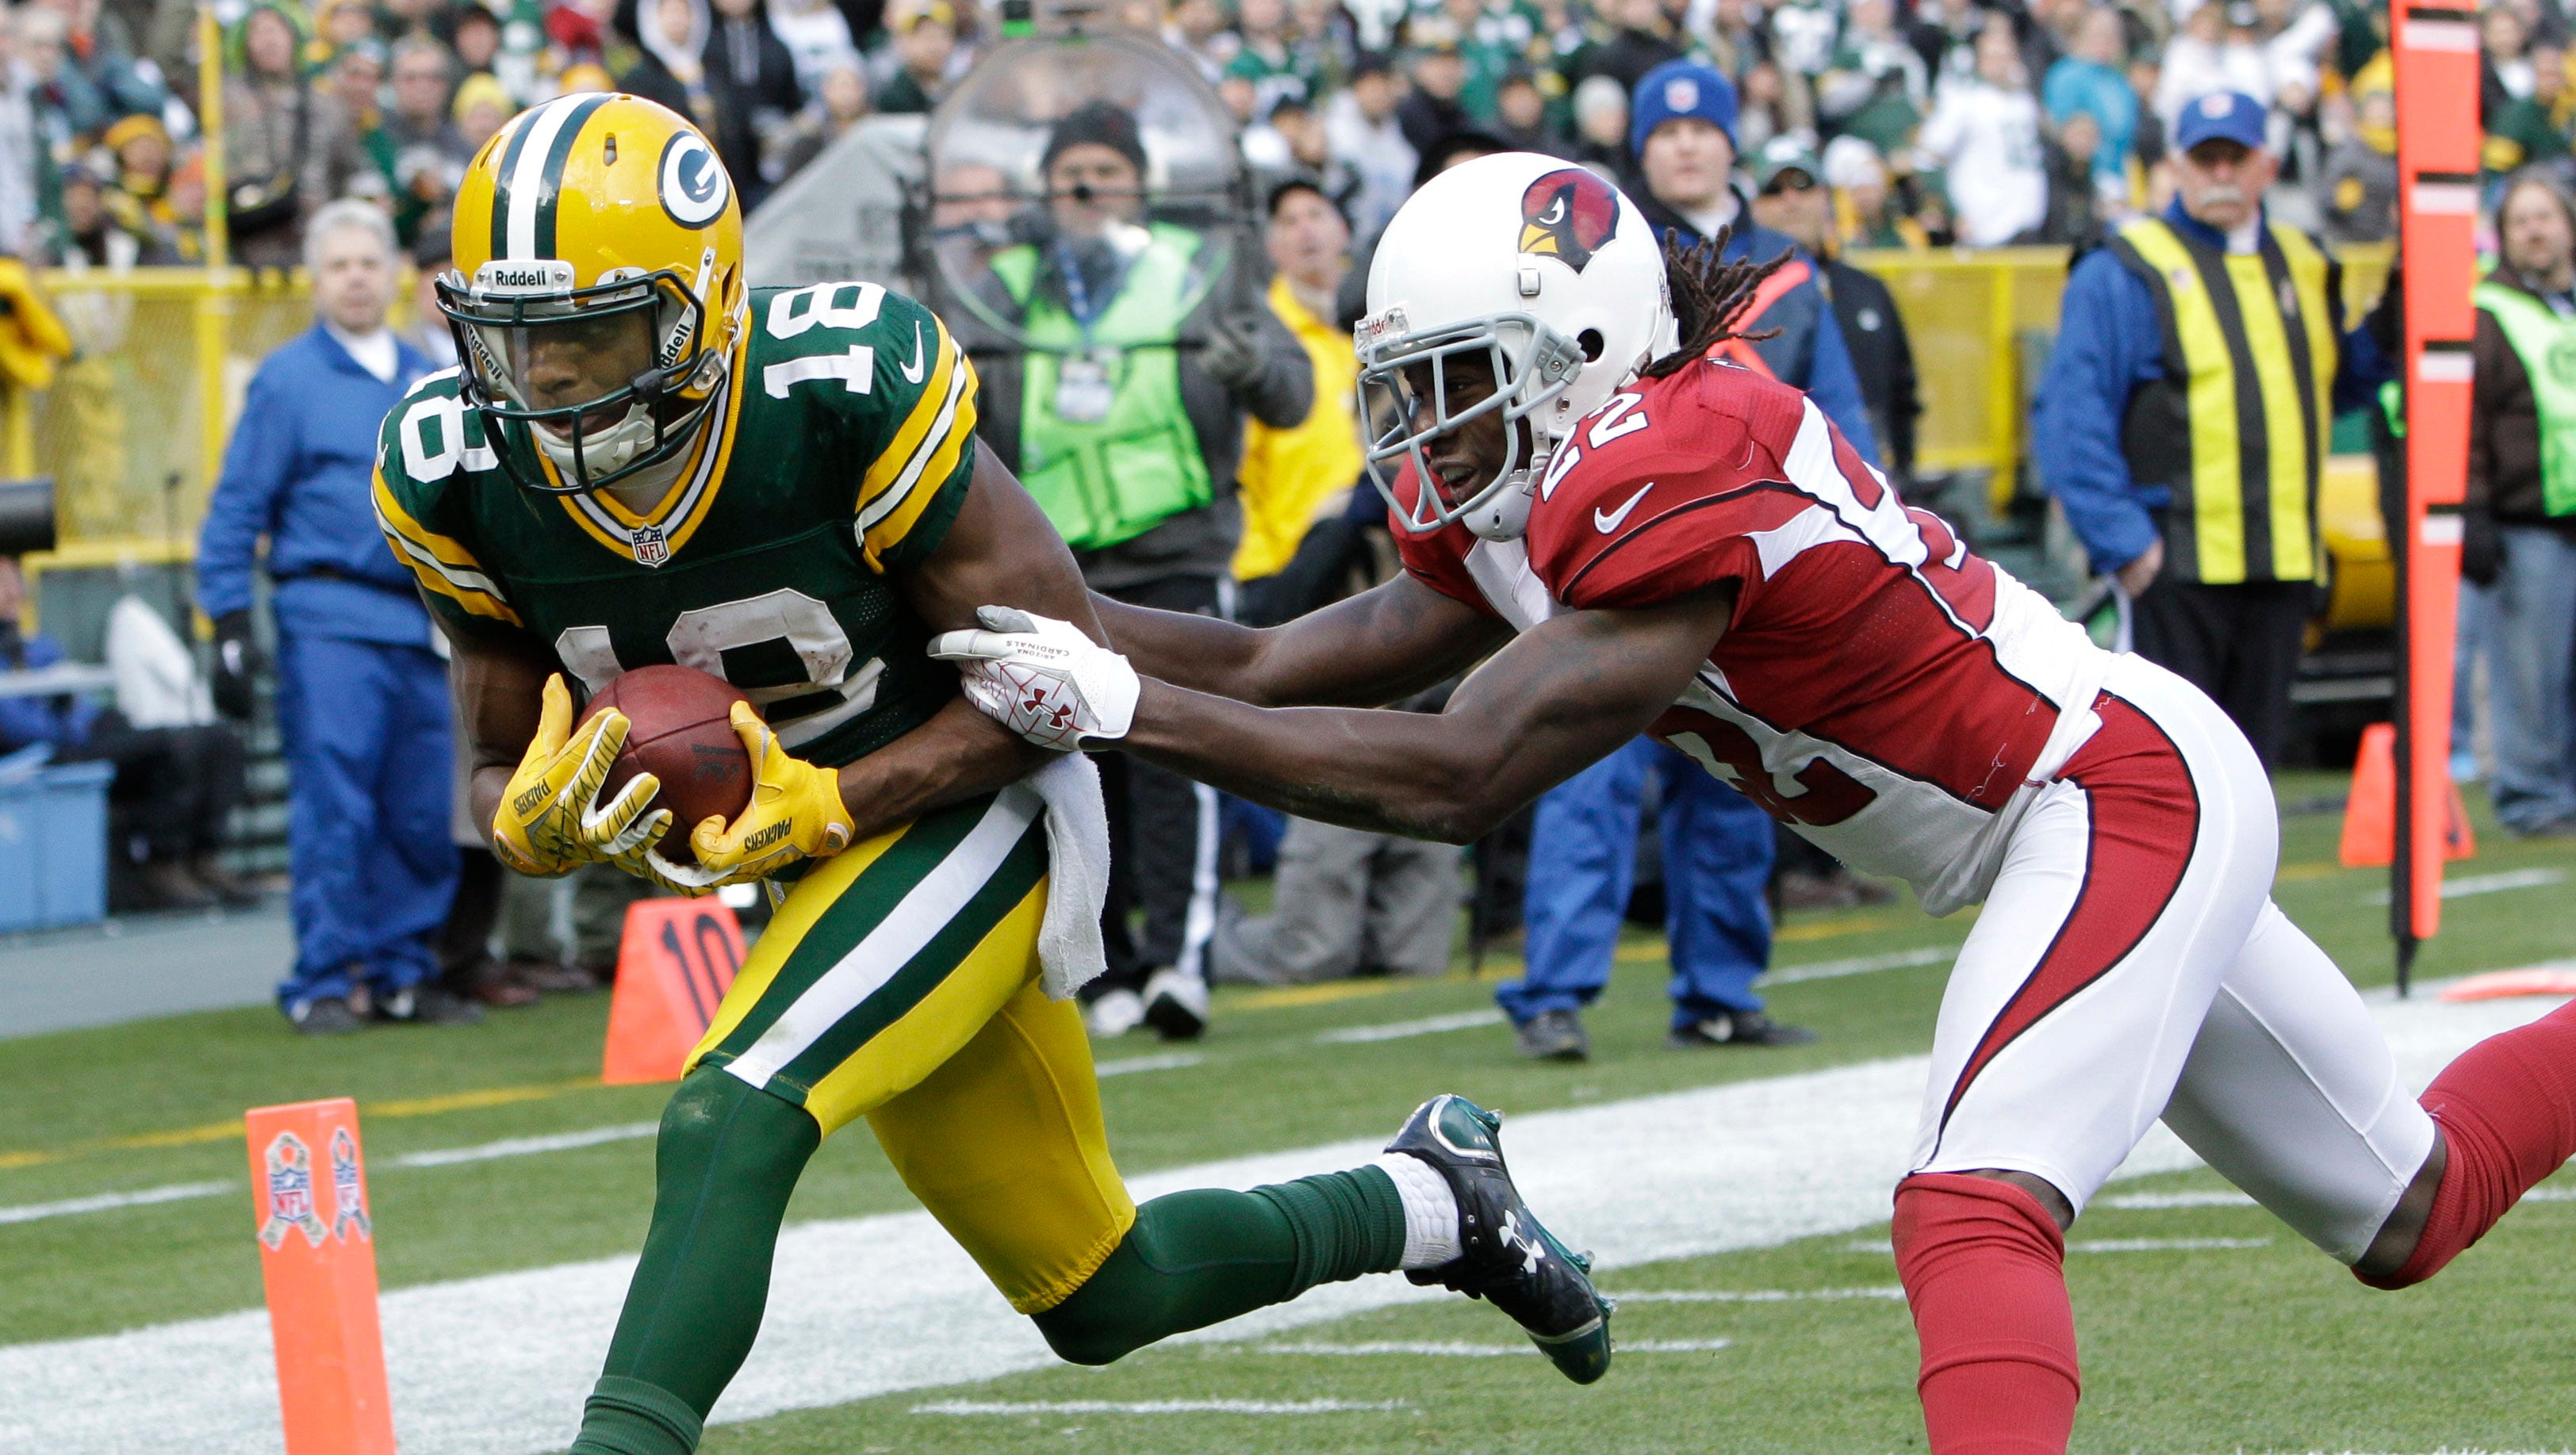 Green Bay Packers' Randall Cobb catches a touchdown pass against Arizona Cardinals' William Gay  onSunday, November 4, 2012, at Lambeau Field in Green Bay, Wisconsin.